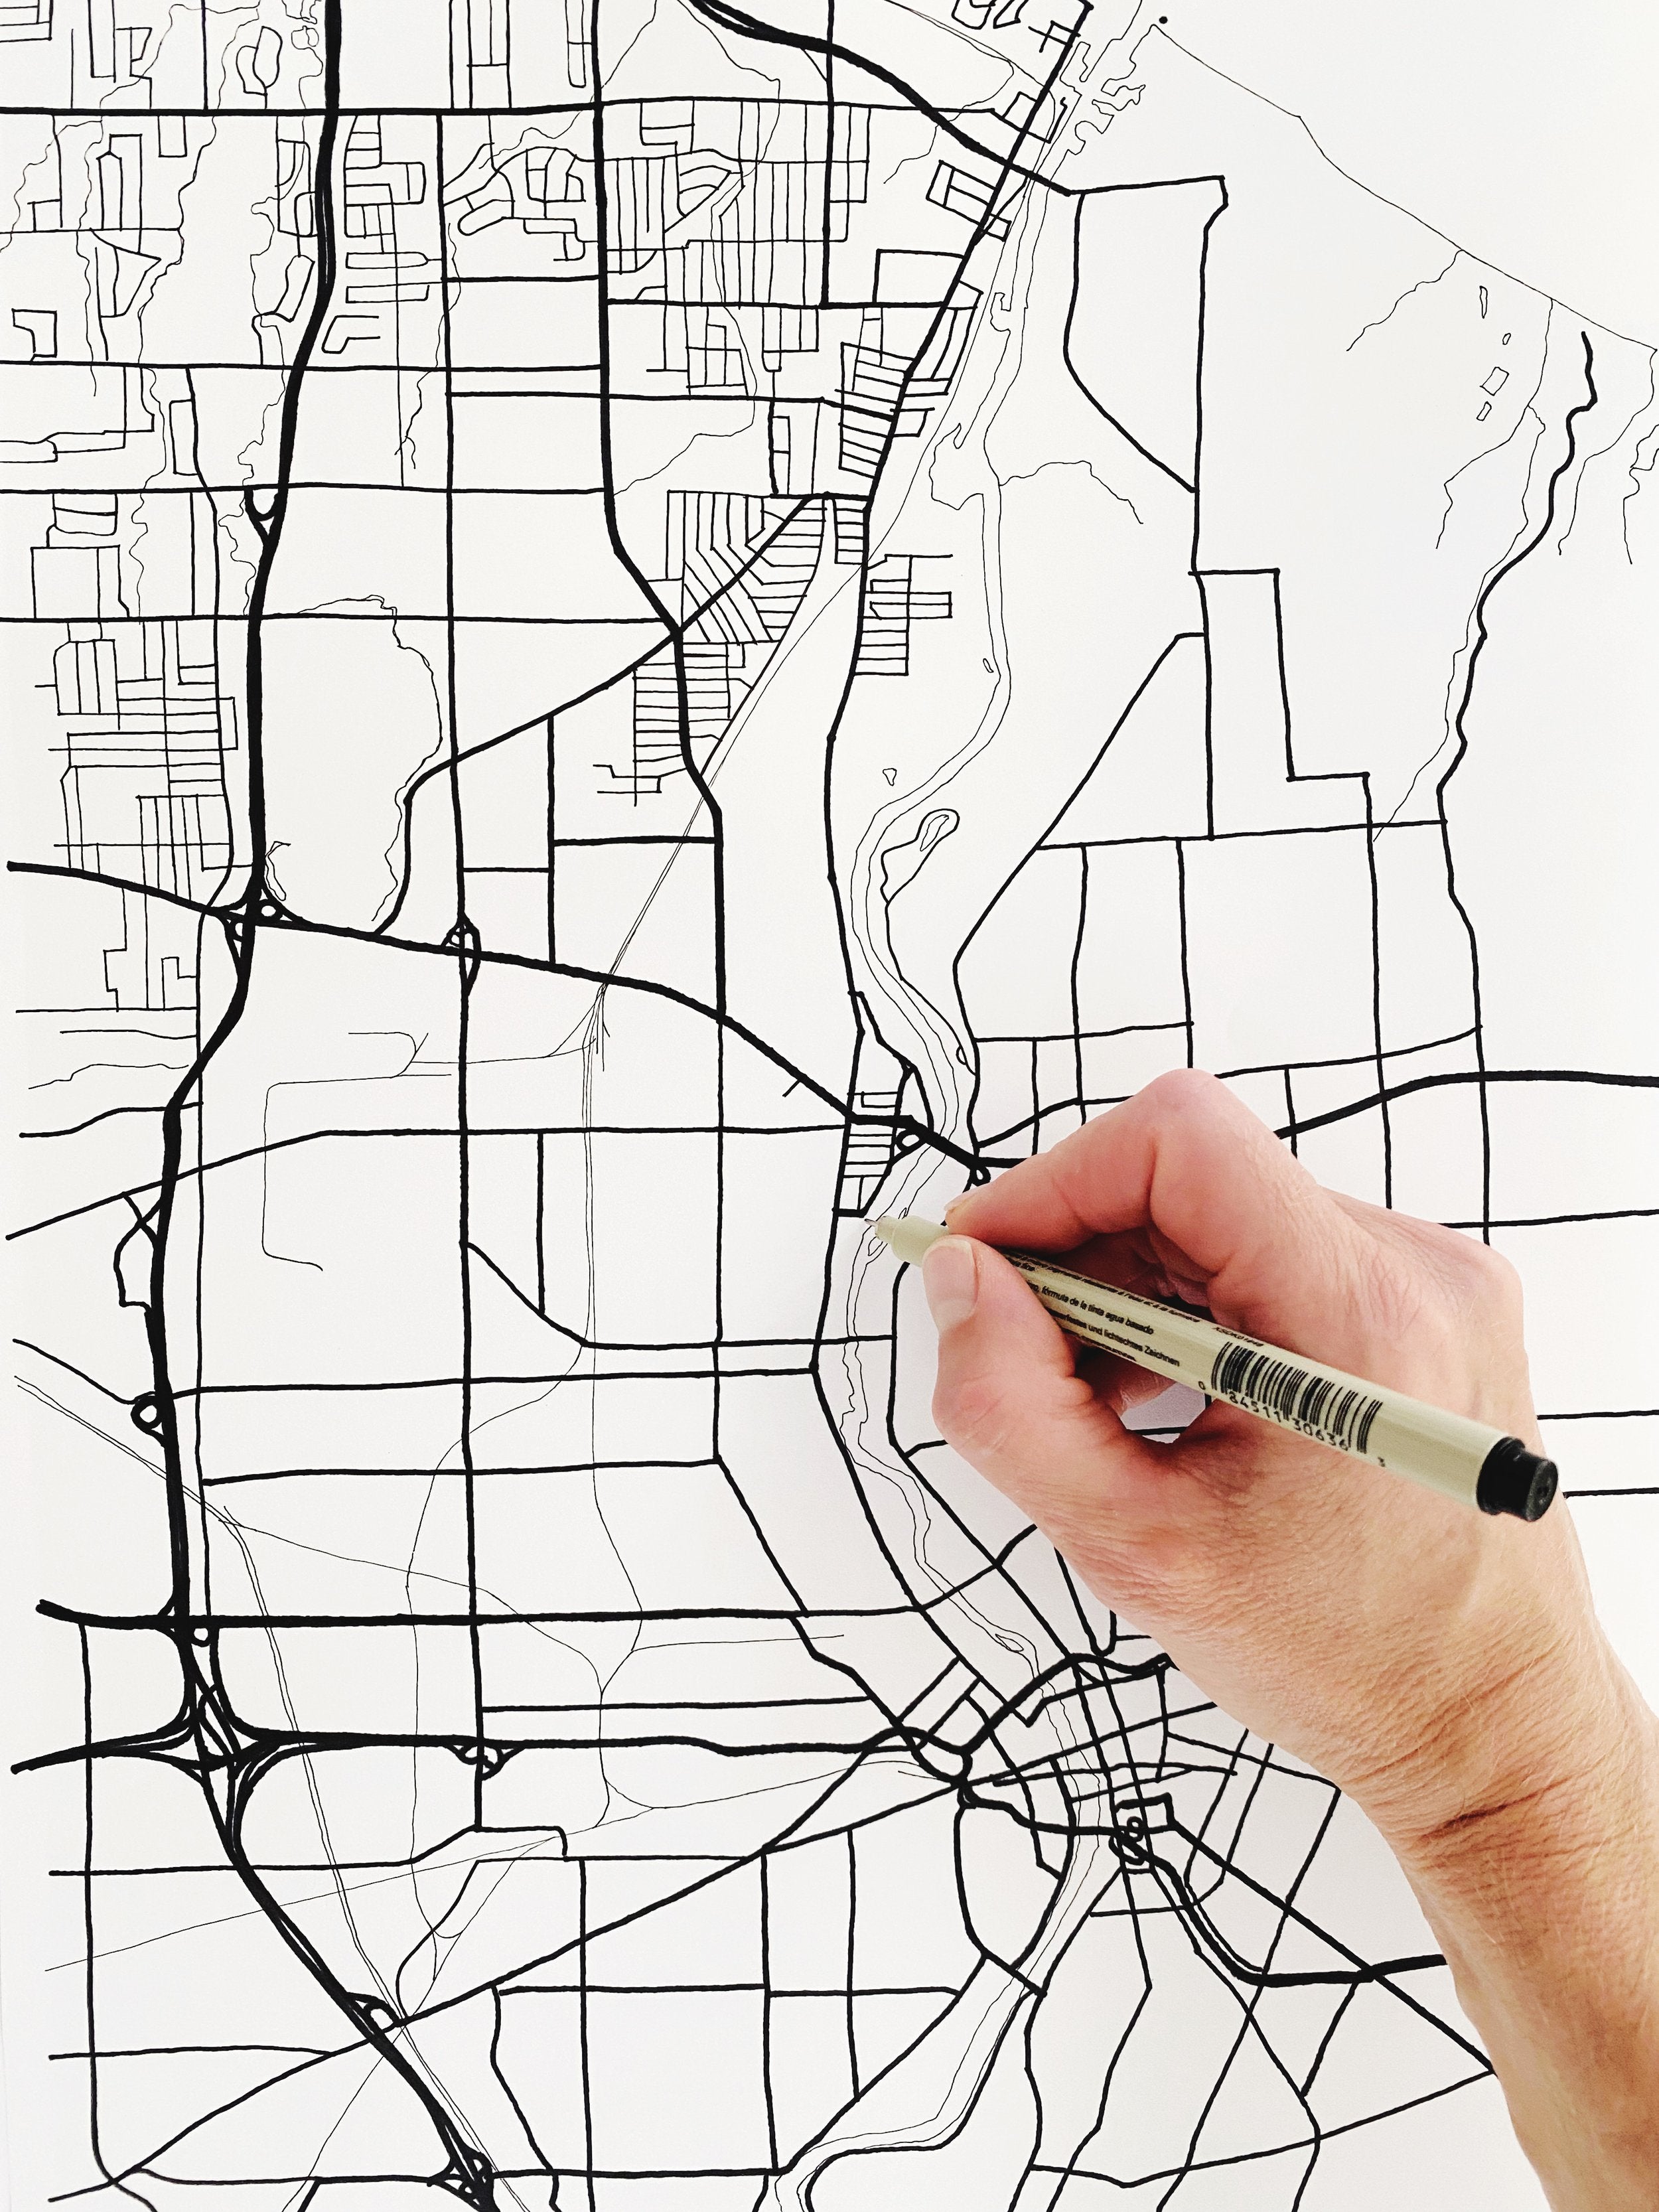 ROCHESTER New York City Lines Map: PRINT